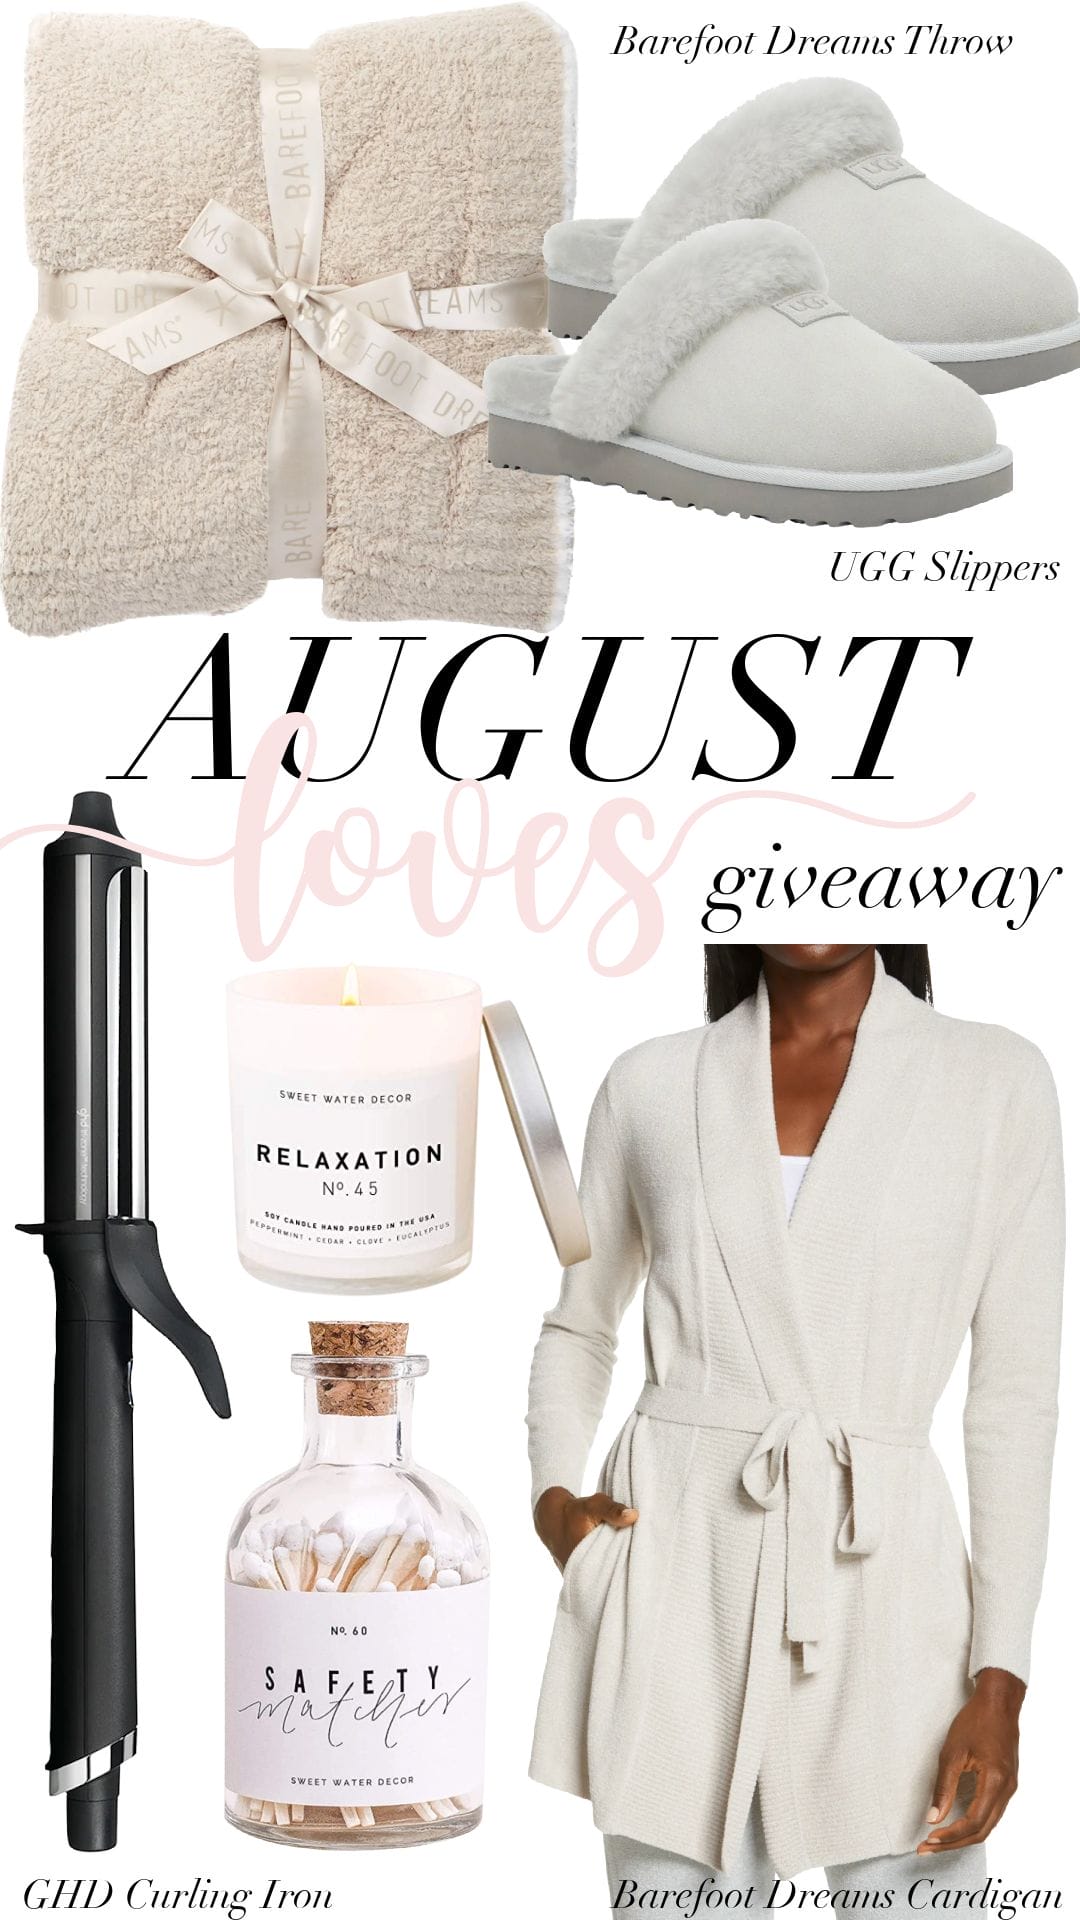 August Loves Giveaway